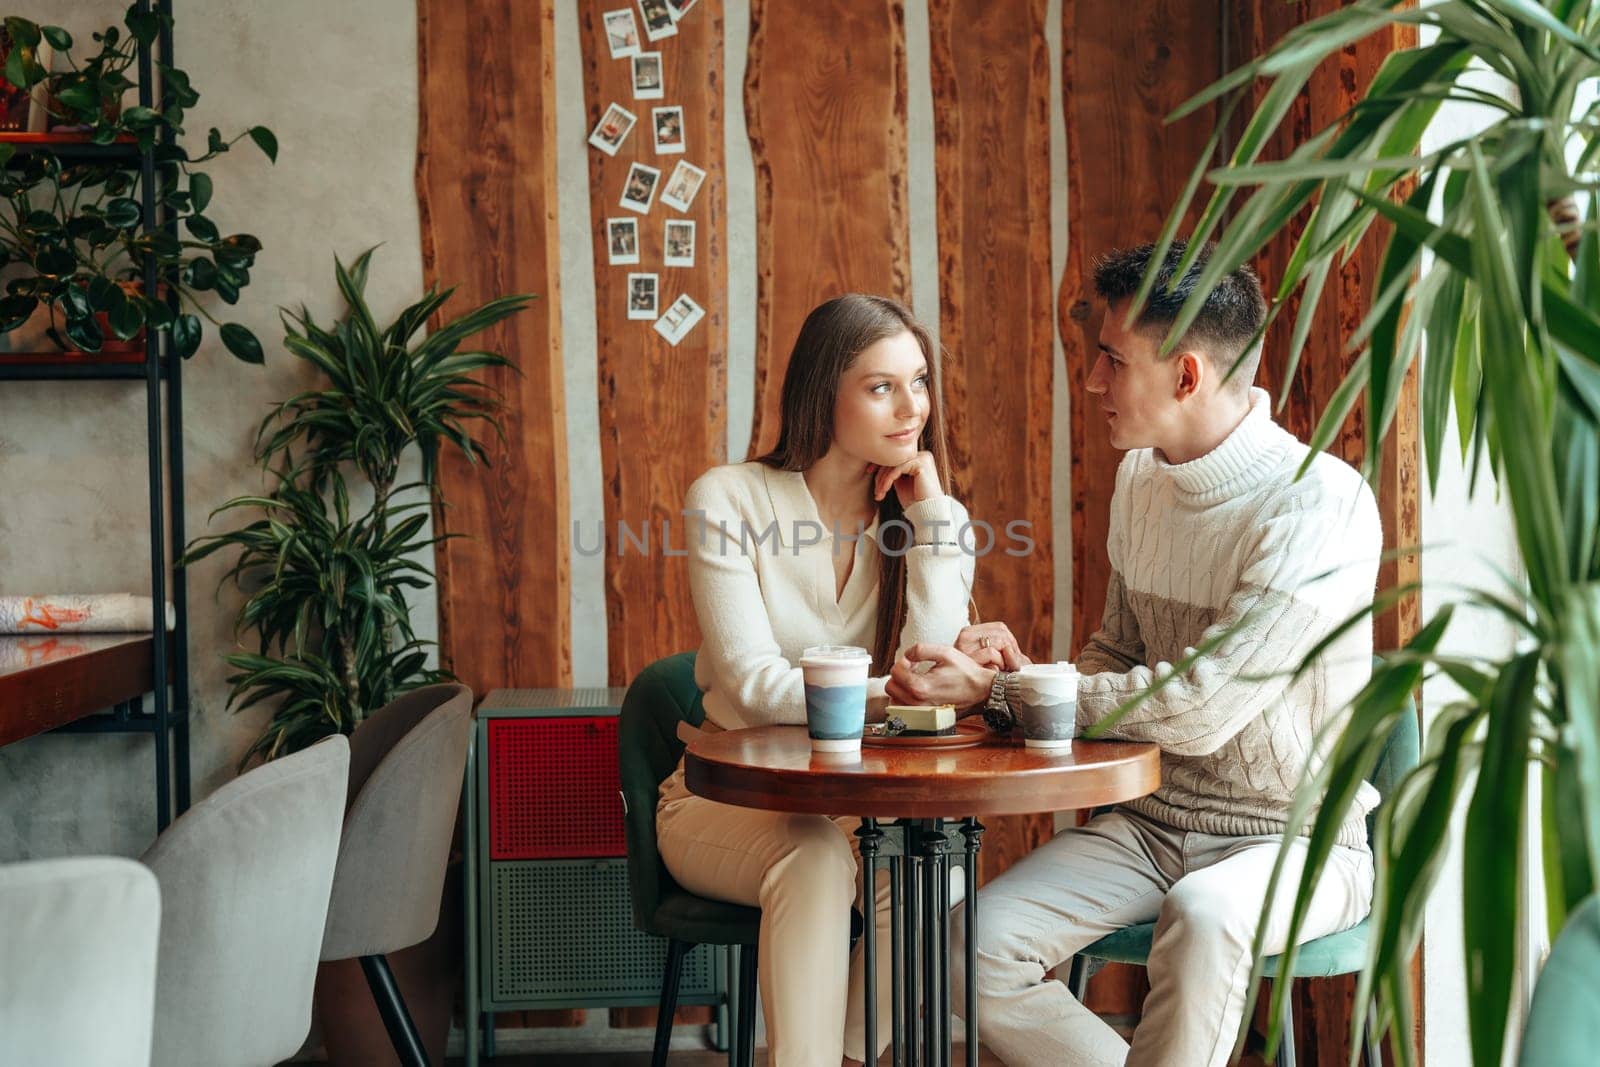 A young man and woman are seated across from each other at a small wooden table in a charming cafe, engrossed in a serene conversation. The woman is resting her chin on her hand, listening intently, while the man gestures as he speaks. The warm, casual atmosphere is enhanced by the presence of indoor plants and decorative items on the wall, suggesting a leisurely daytime outing.